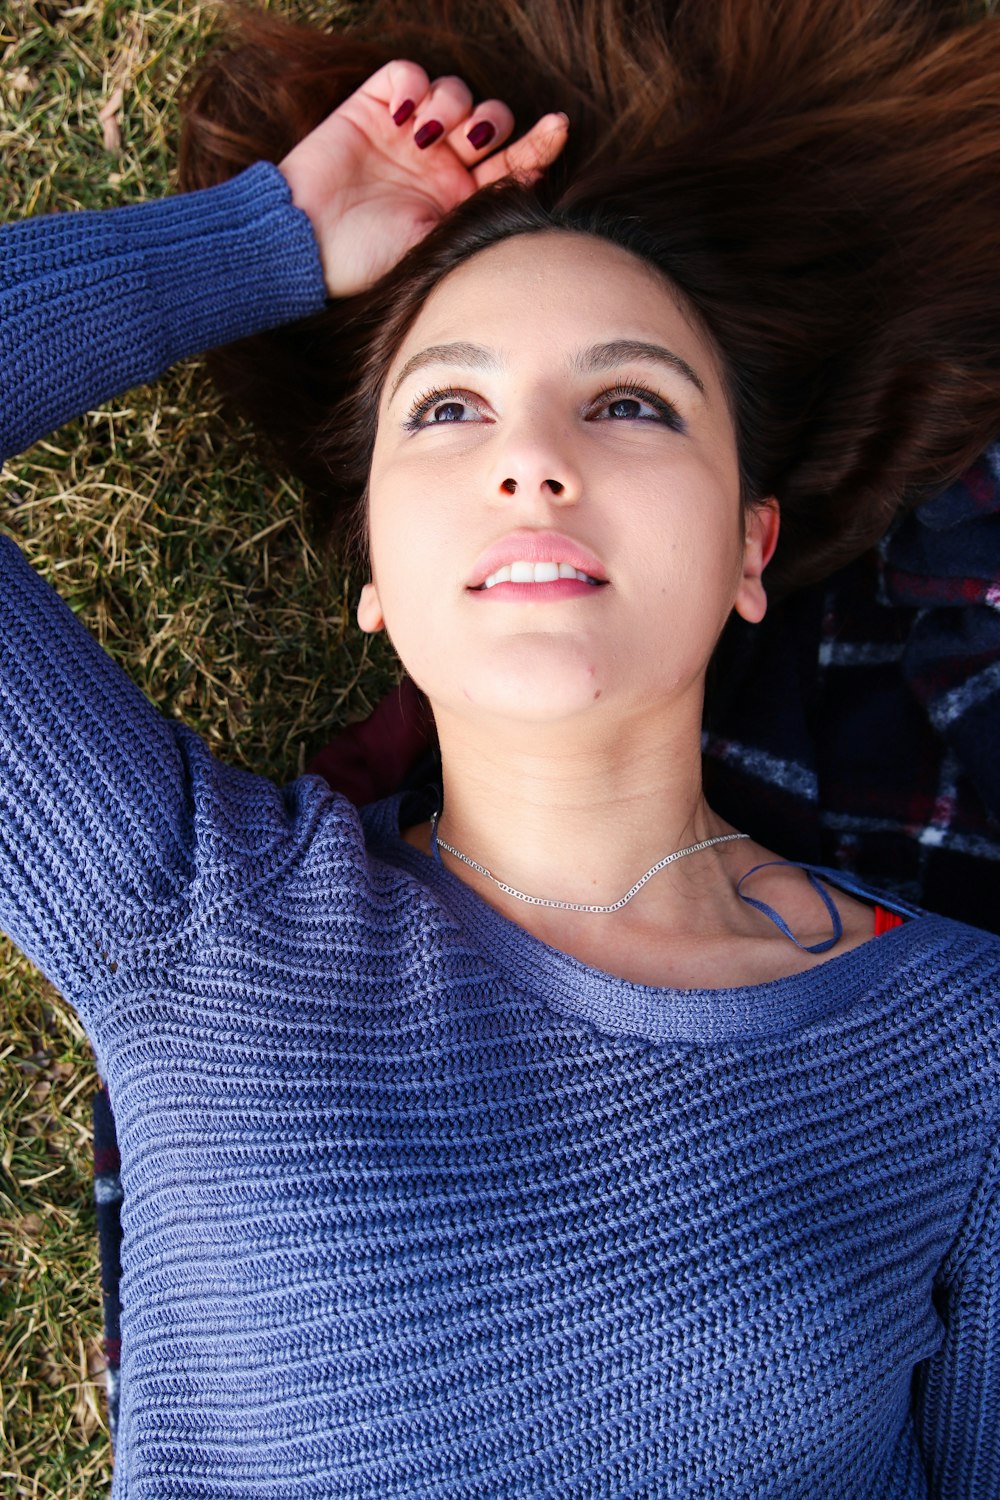 woman in blue and black crew neck long sleeve shirt lying on green grass during daytime